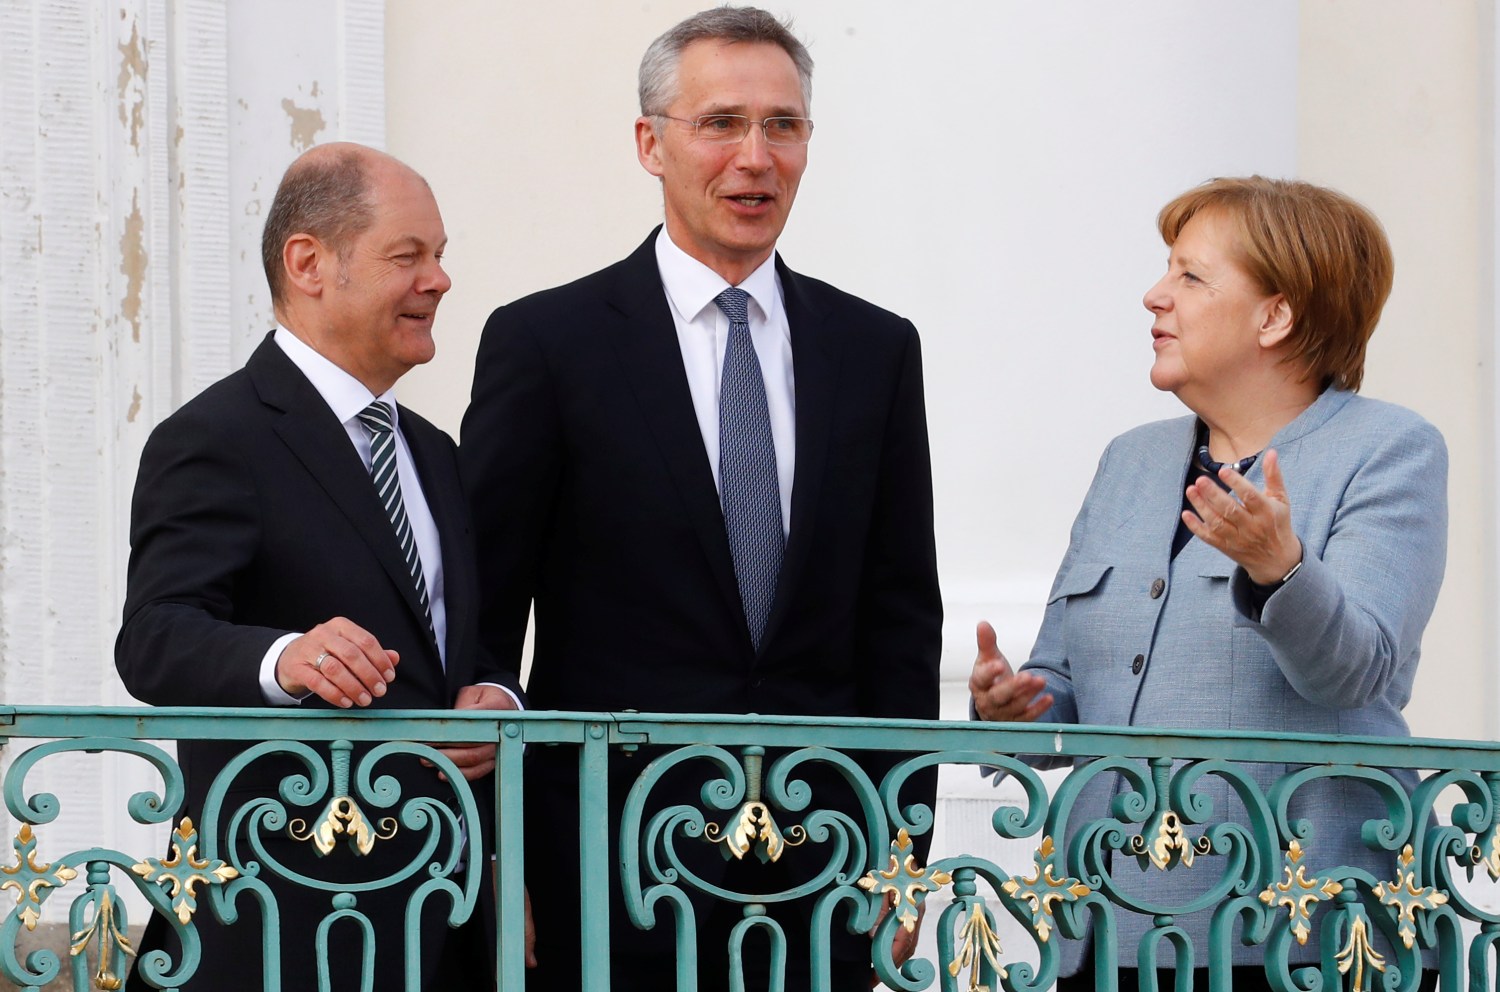 German Chancellor Angela Merkel and Finance Minister Olaf Scholz welcome NATO Secretary General Jens Stoltenberg at the German government guesthouse Meseberg Palace in Meseberg, Germany, April 10, 2018. REUTERS/Fabrizio Bensch